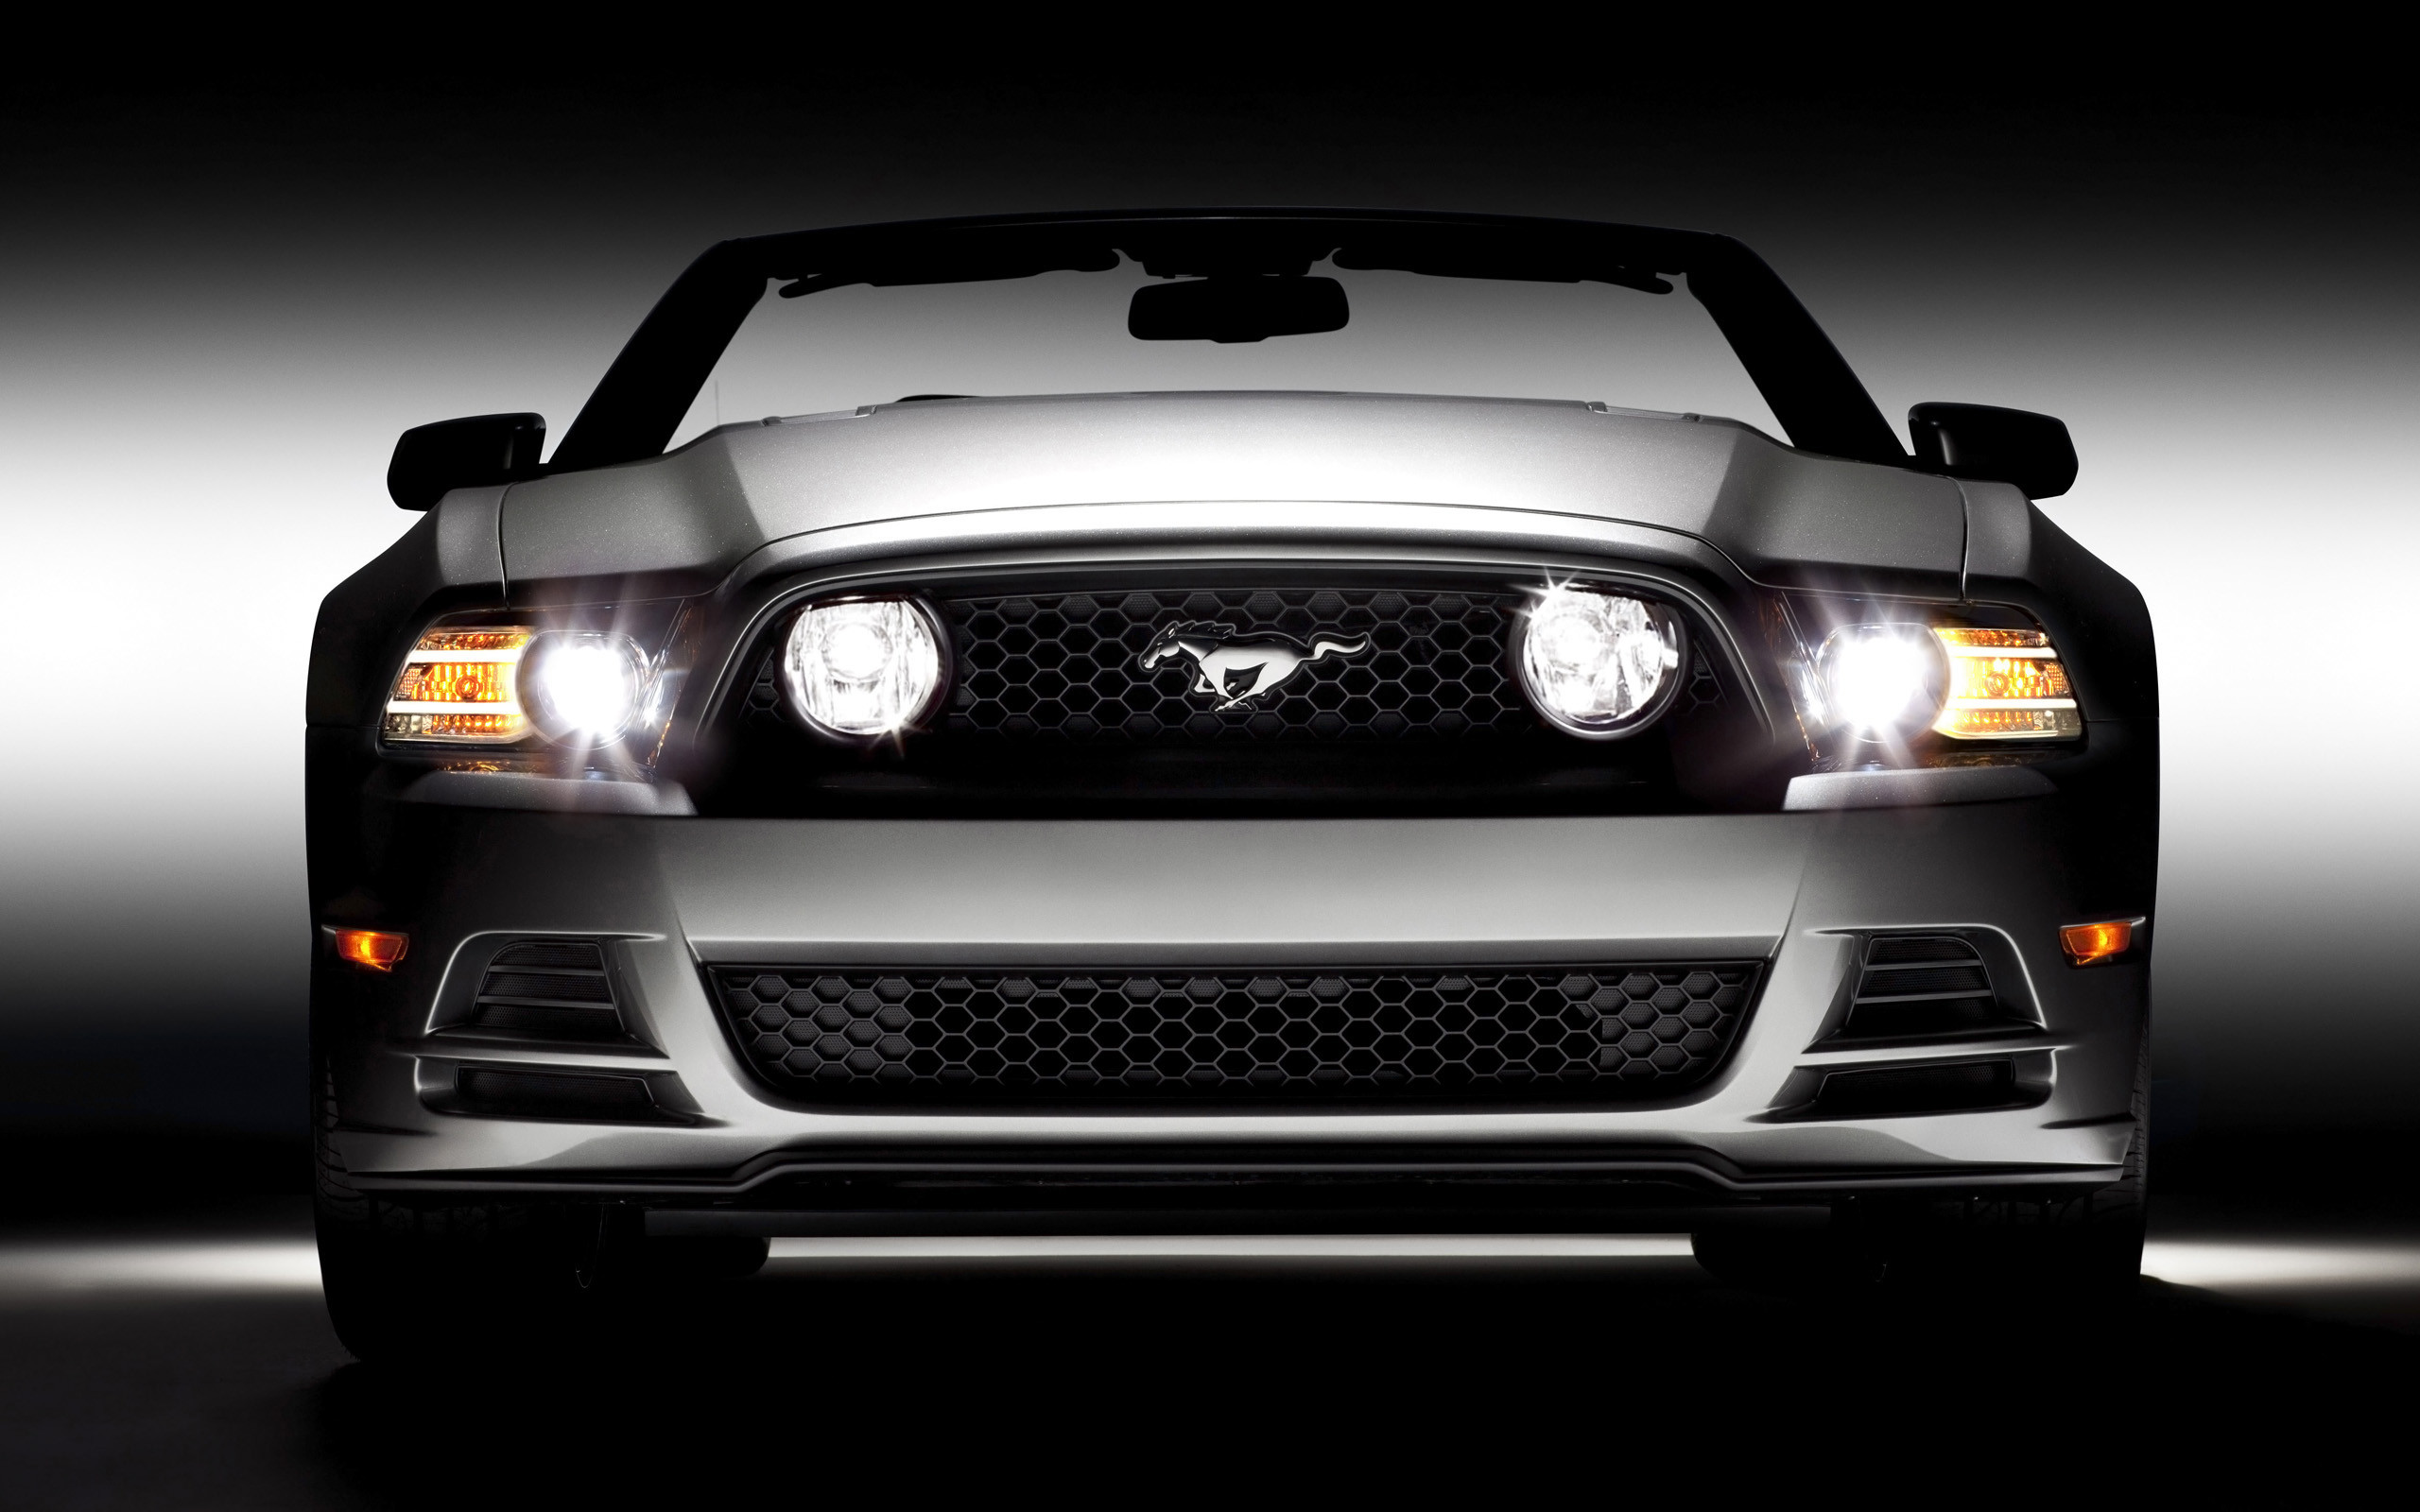 2014 Ford Mustang Wallpaper. Ford Mustang 2014